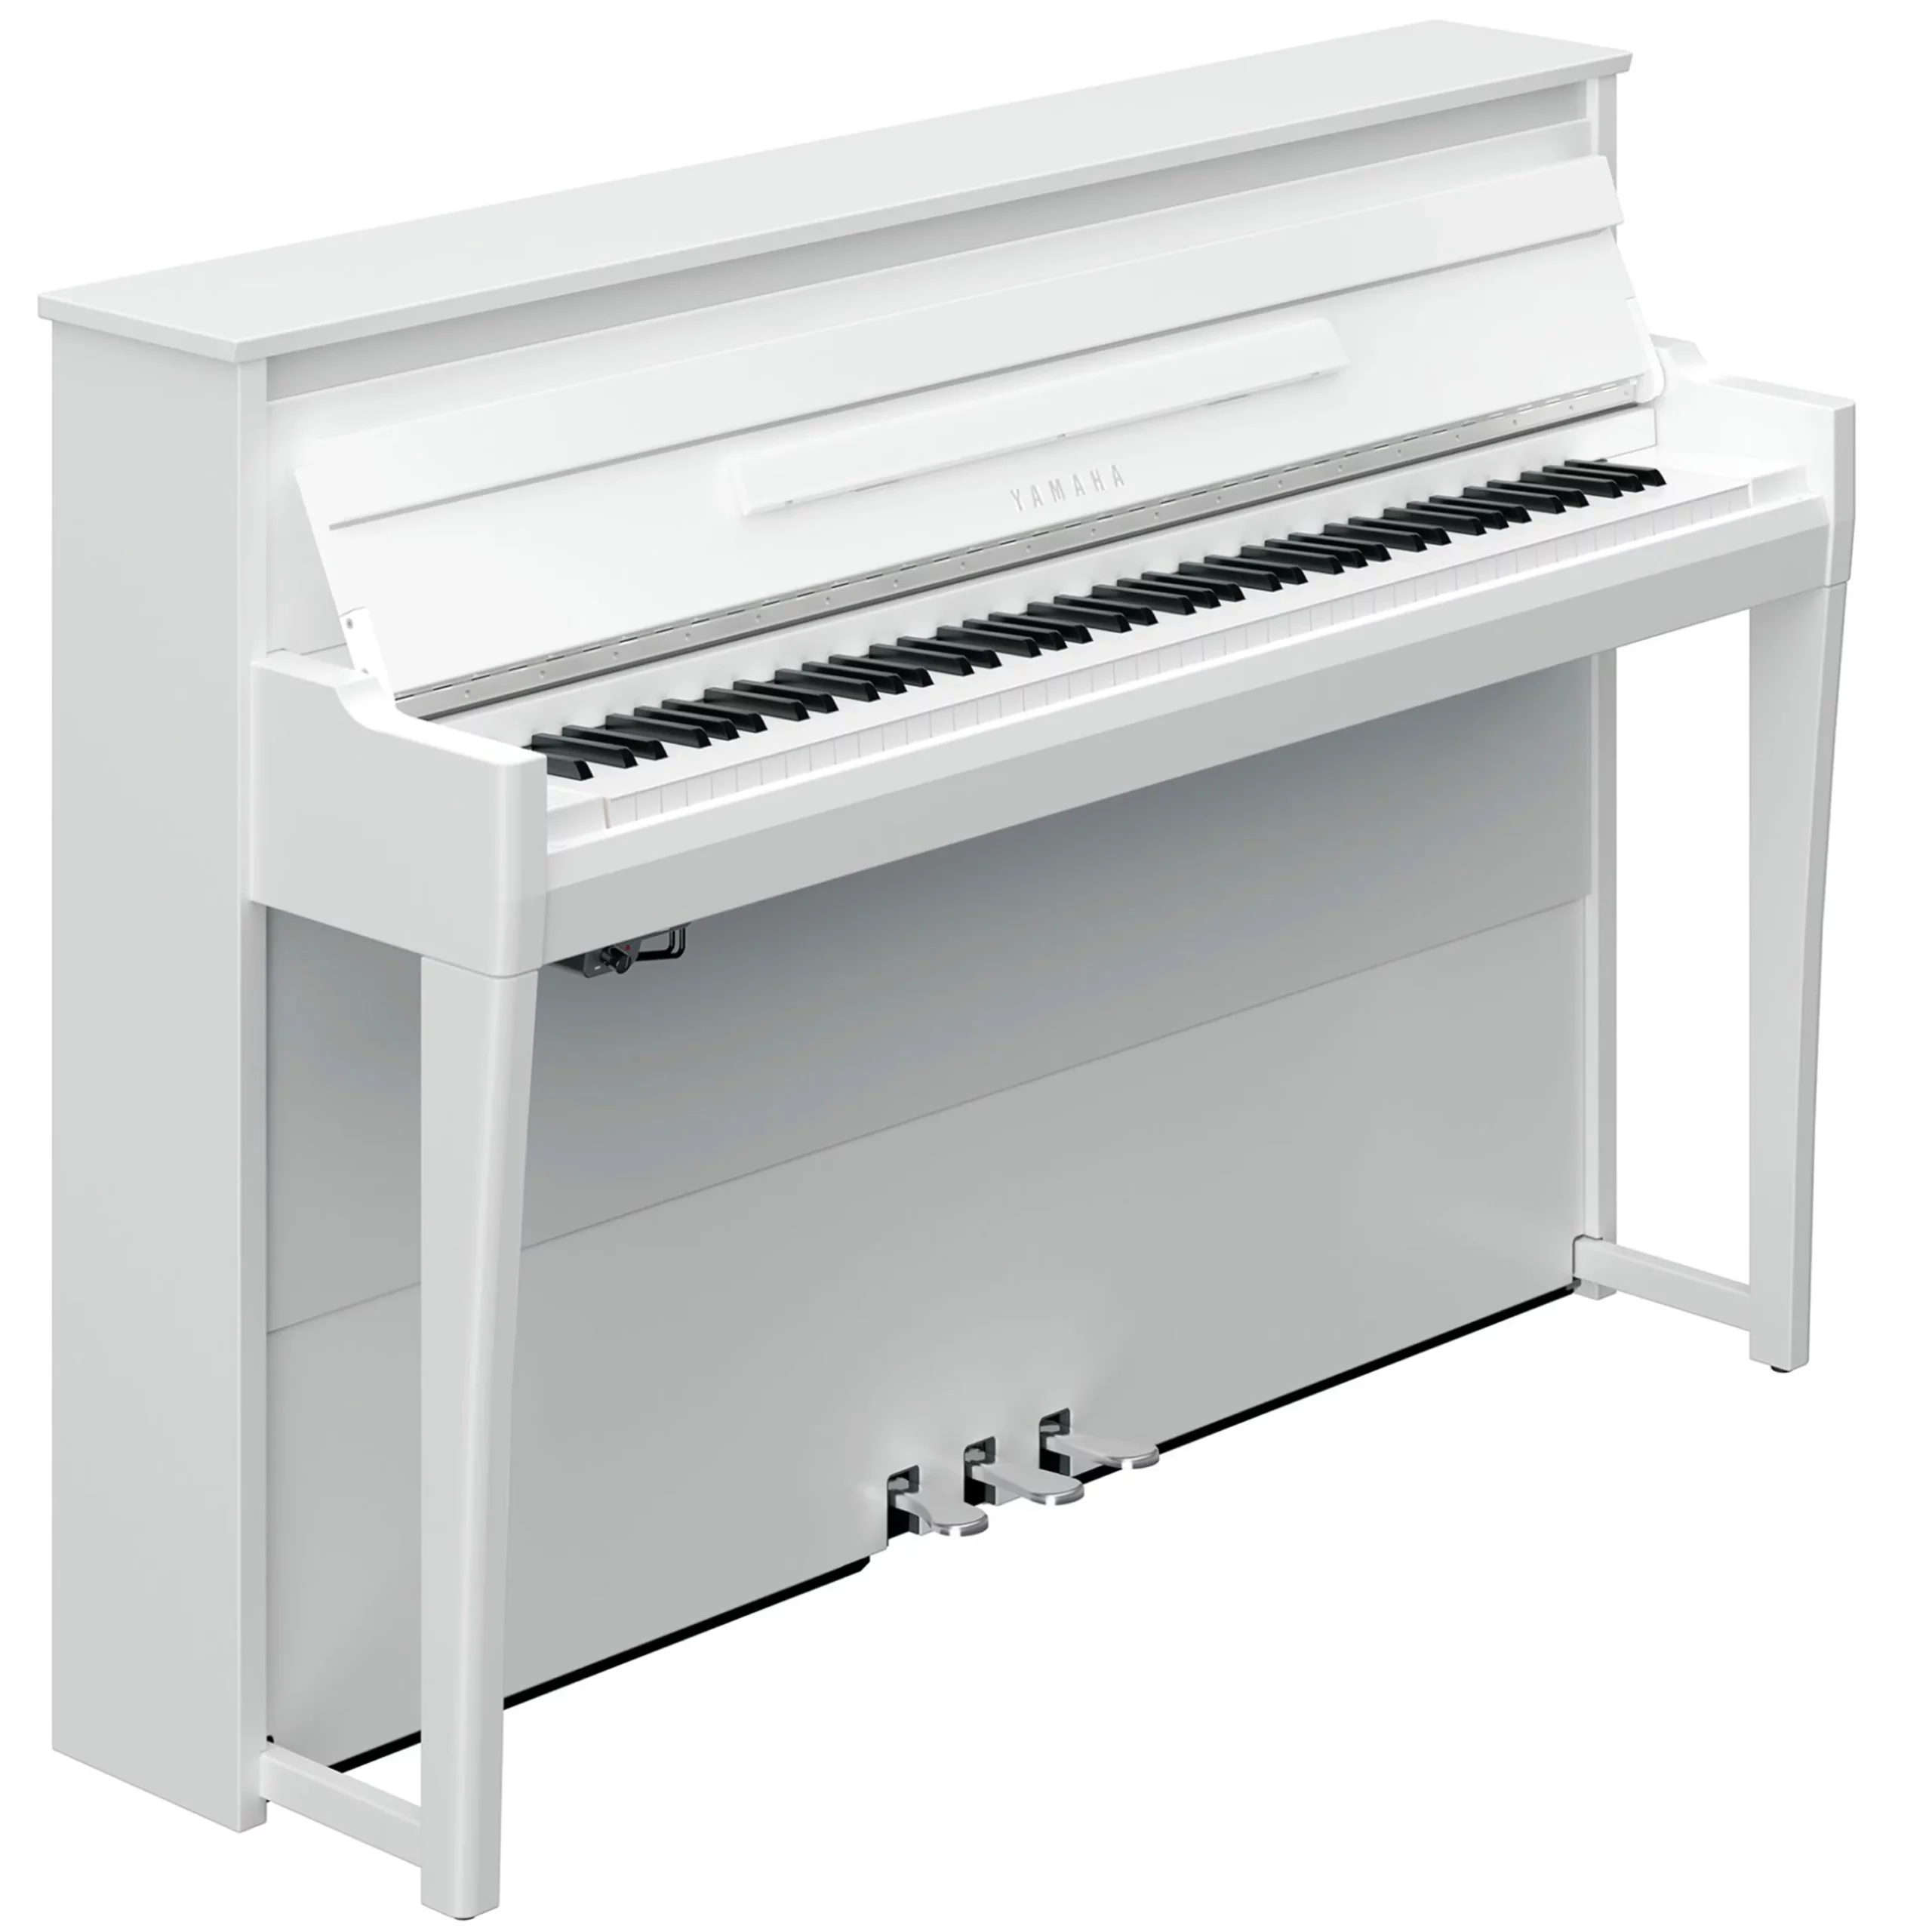 
GH1B Yamaha Piano Price: Everything You Need To Know Before Buying [Expert Review]